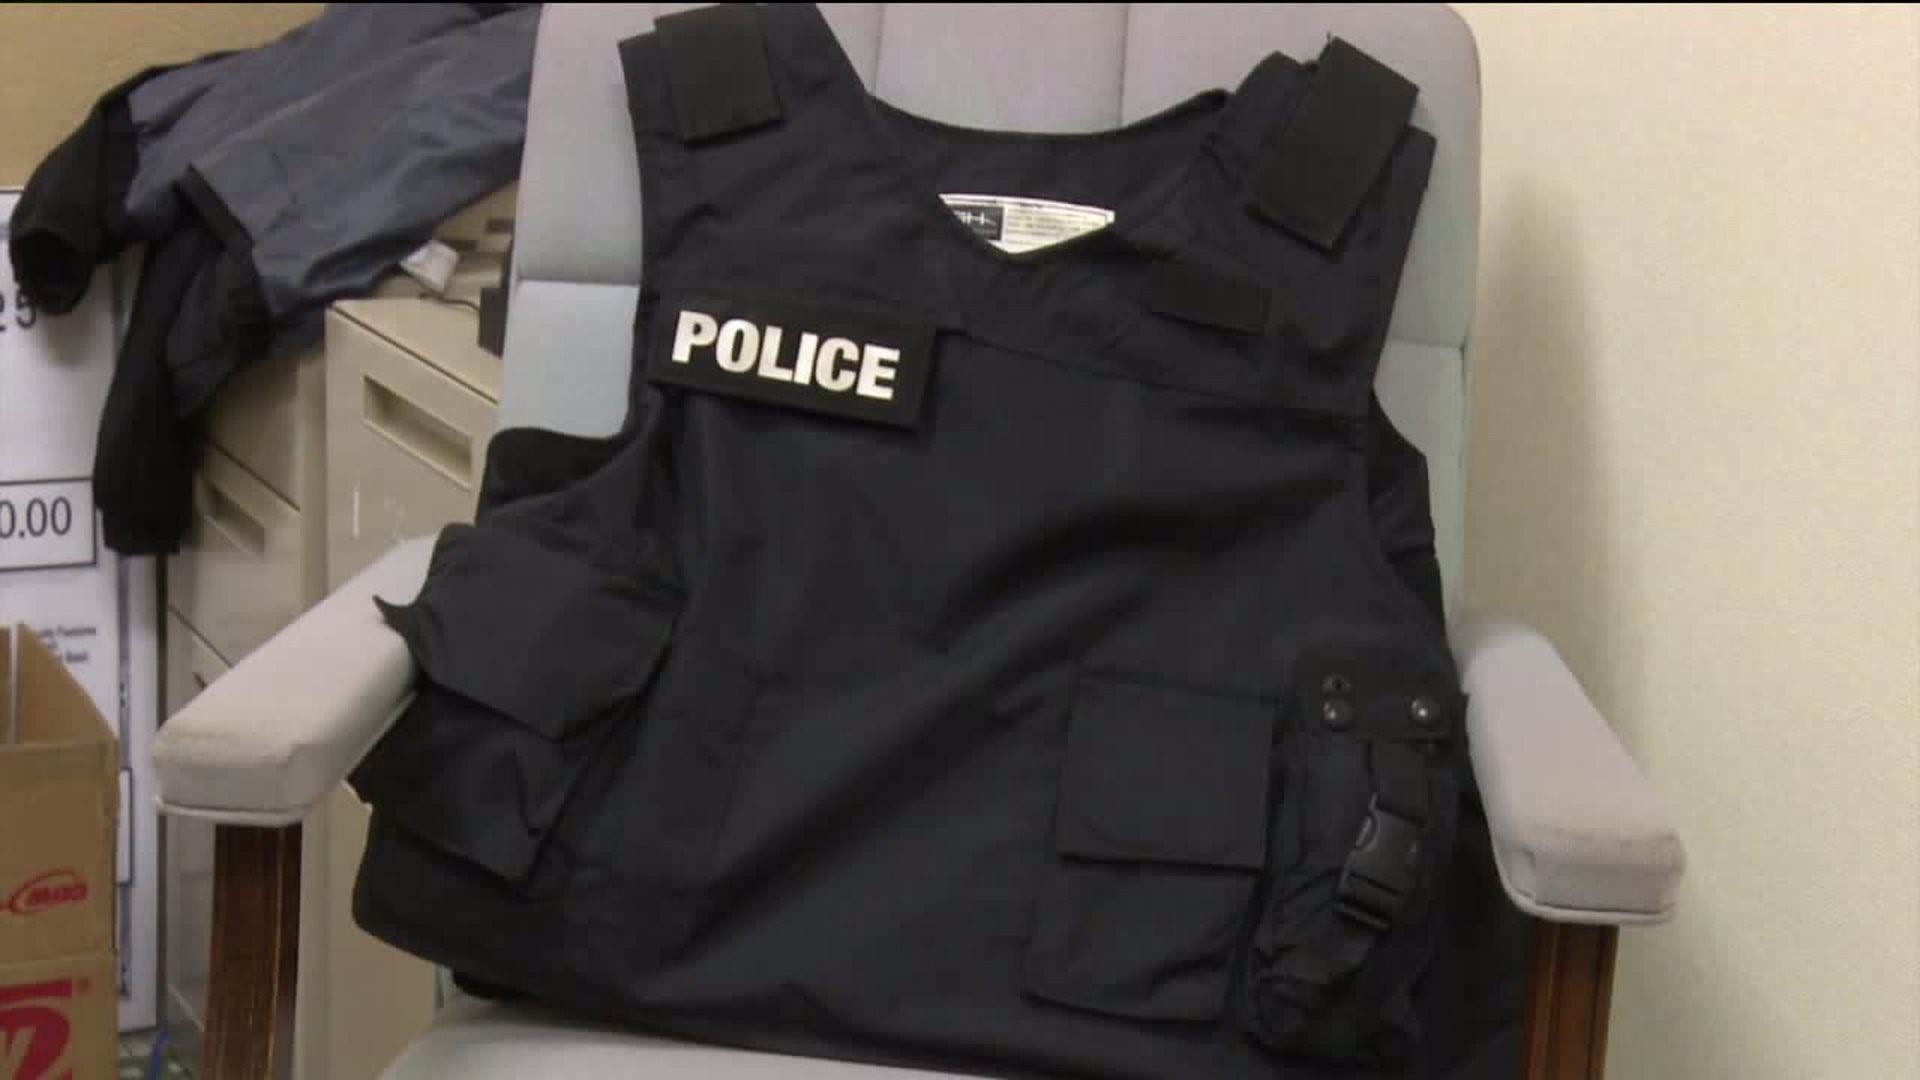 Luzerne County Auto Business Collects To Buy Police Vests